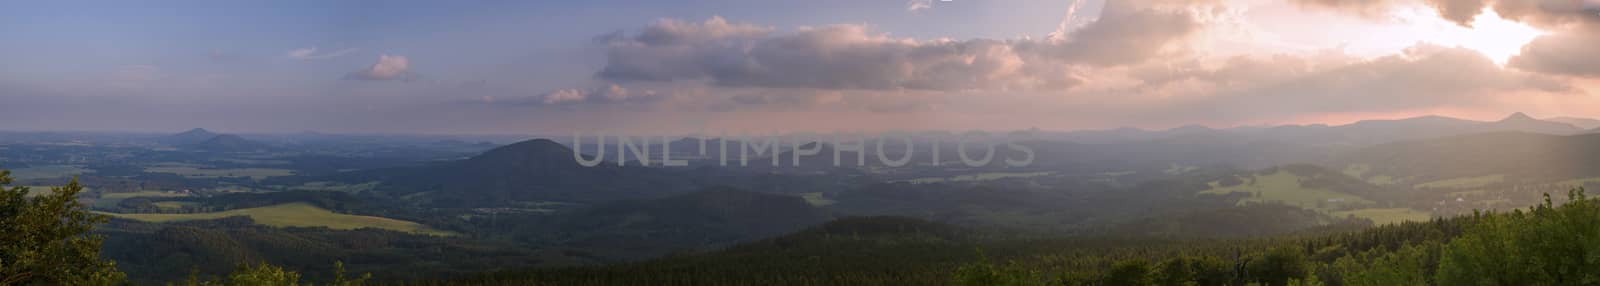 Lusatian Mountains (luzicke hory) wide panorama, panoramic view from Hochwald (Hvozd) mountain on czech german borders with blue green hills forest and pink cloudy sunset sky background